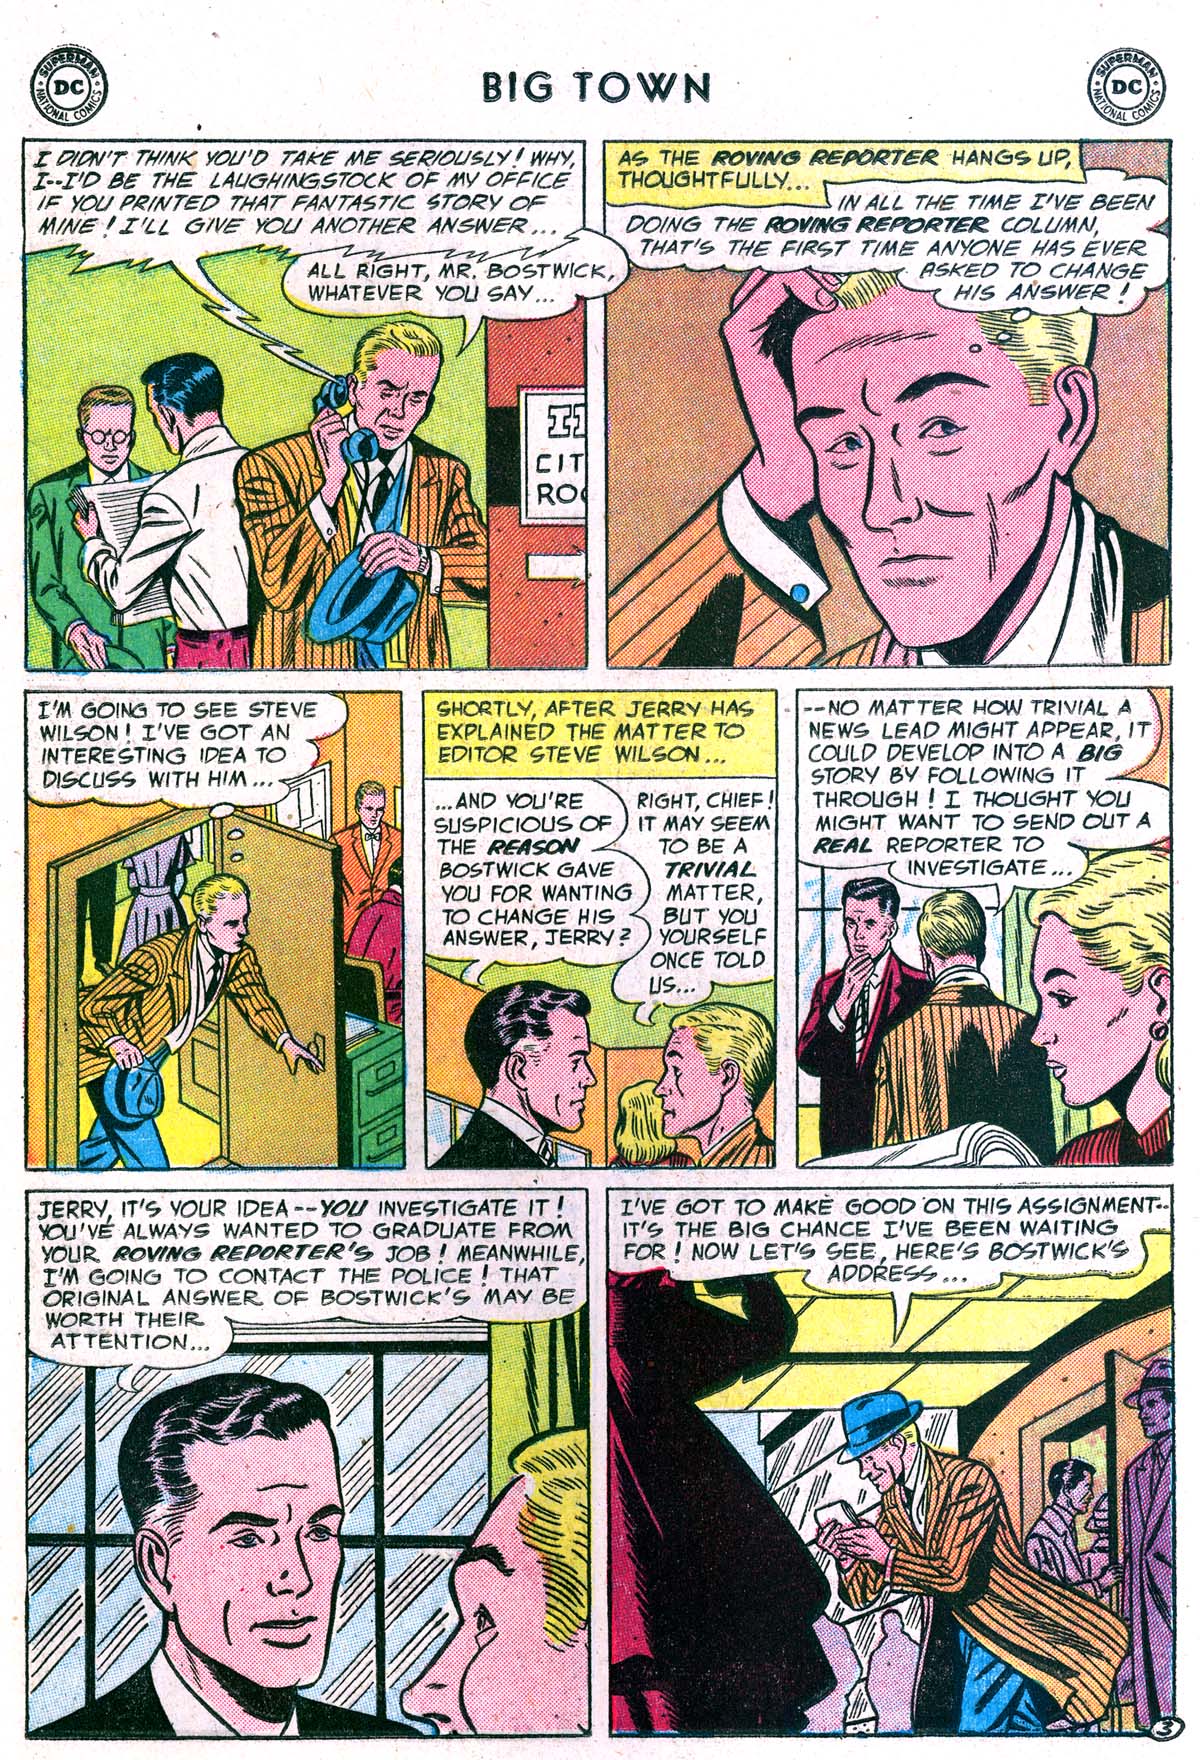 Big Town (1951) 38 Page 15